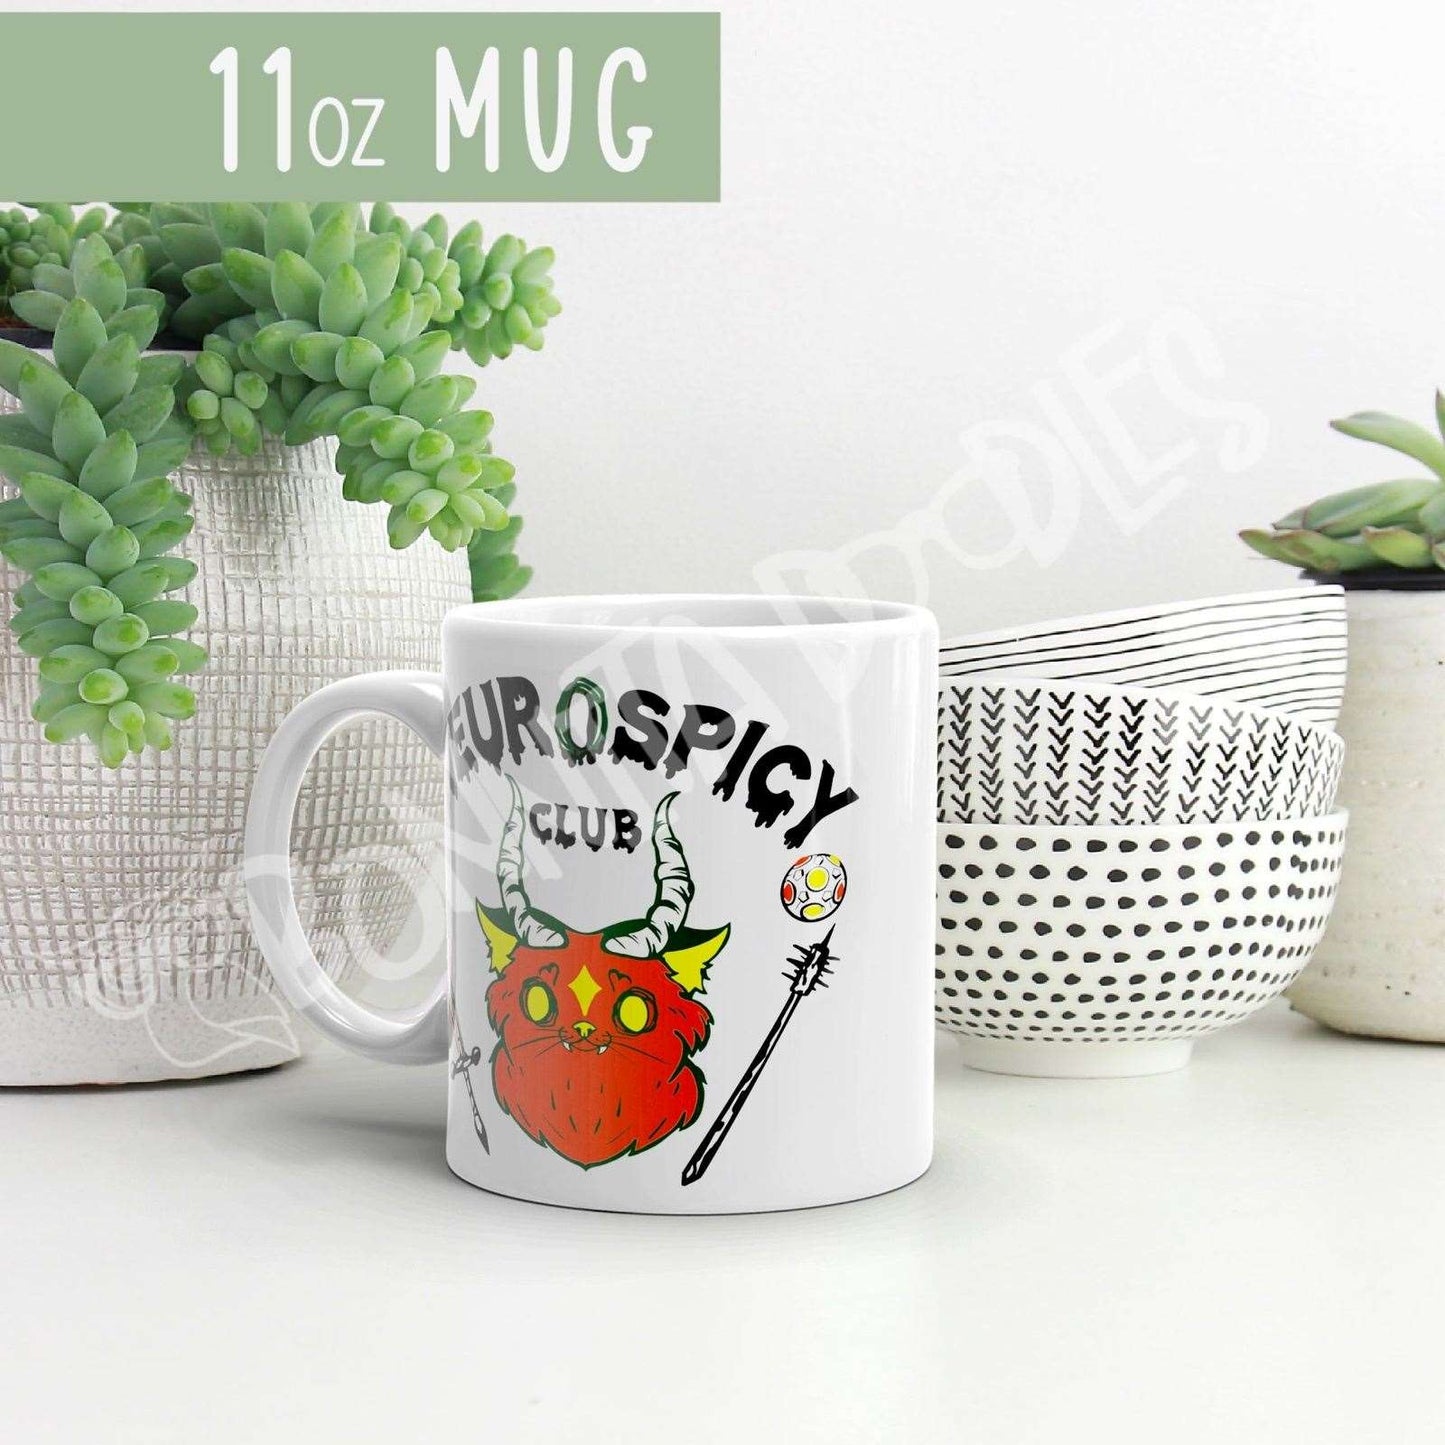 Neurospicy club mug - made to order - can be personalised